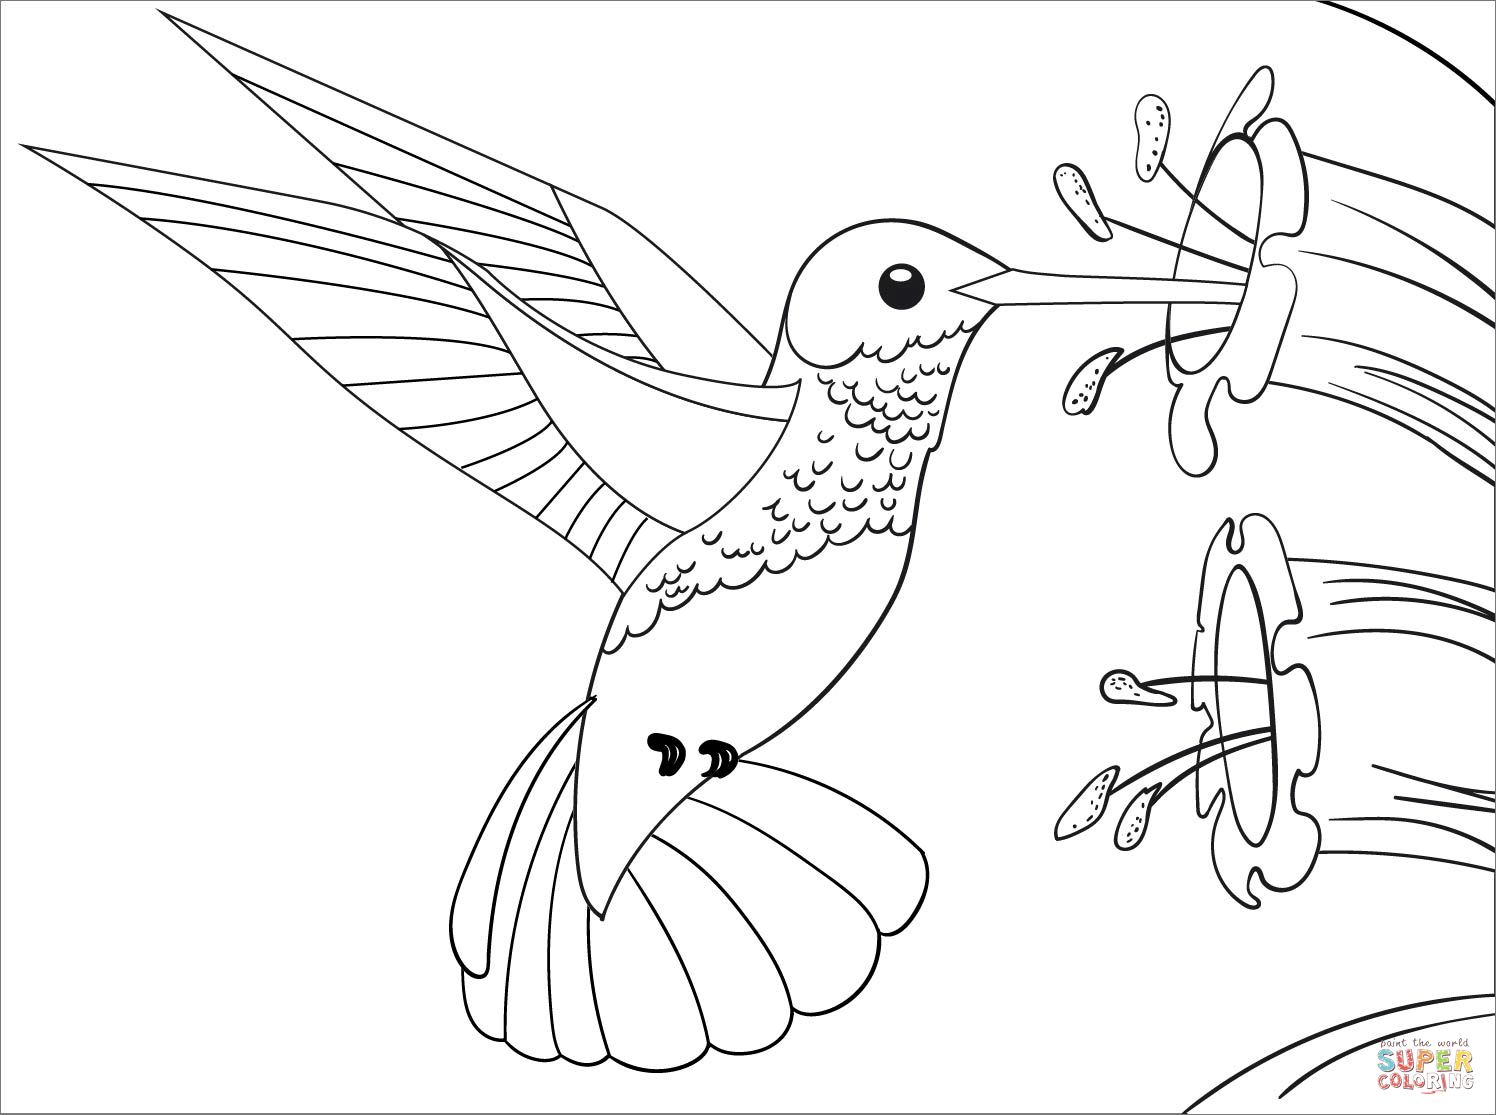 Hummingbird coloring page free printable coloring pages